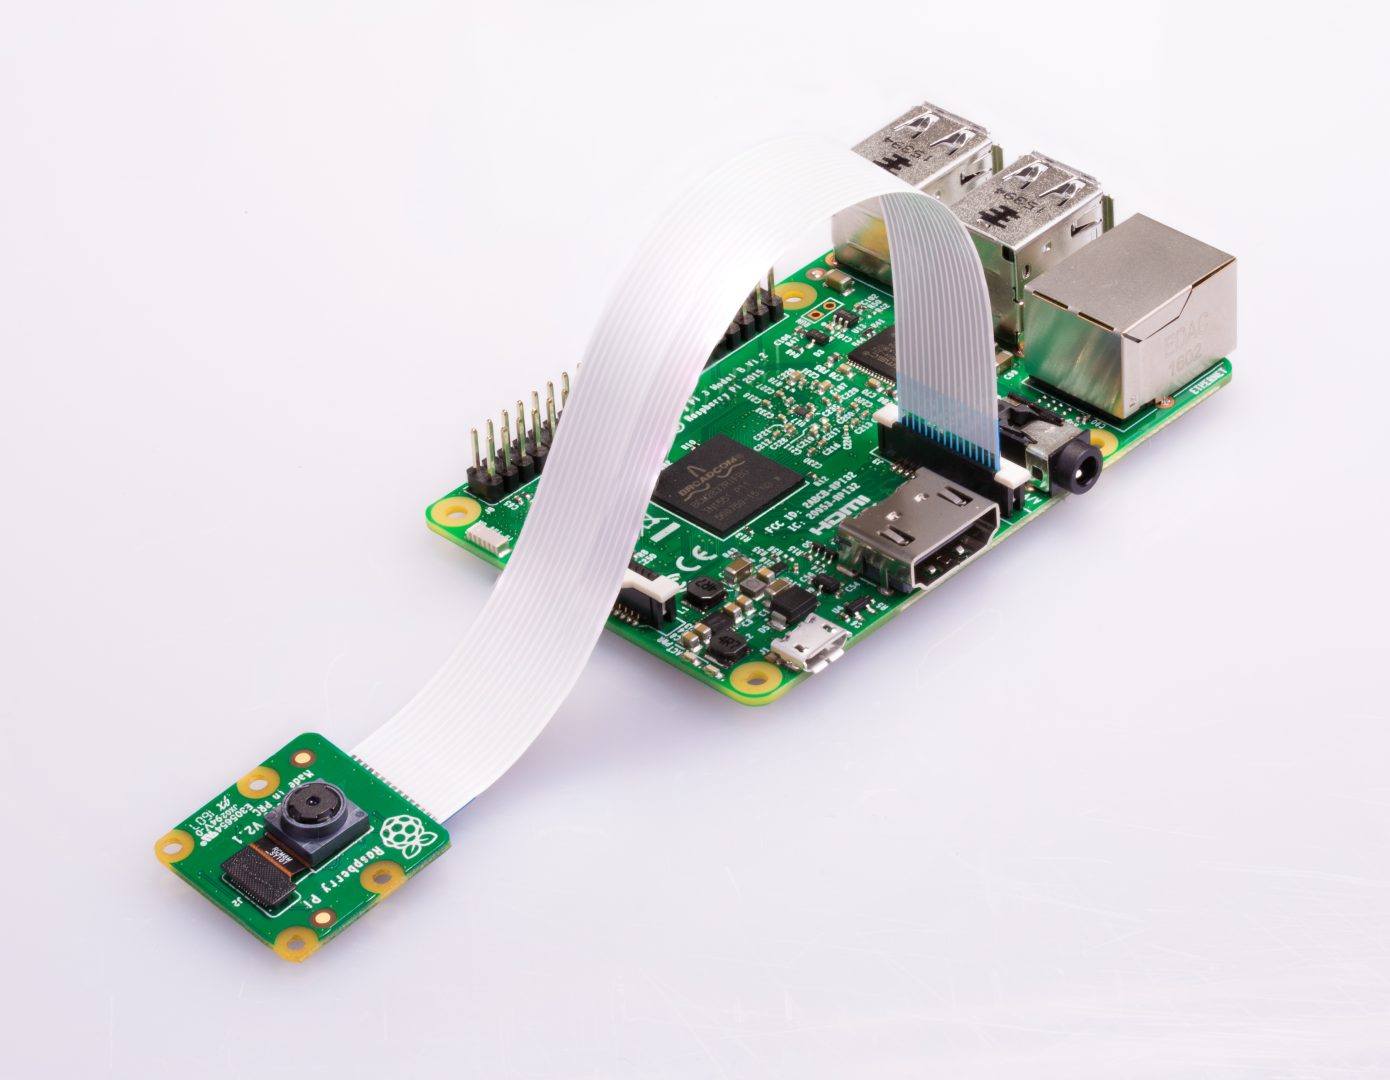 For this project I use a Raspbbery Pi in combination with a Pi Camera. Image from https://projects.raspberrypi.org/en/projects/getting-started-with-picamera